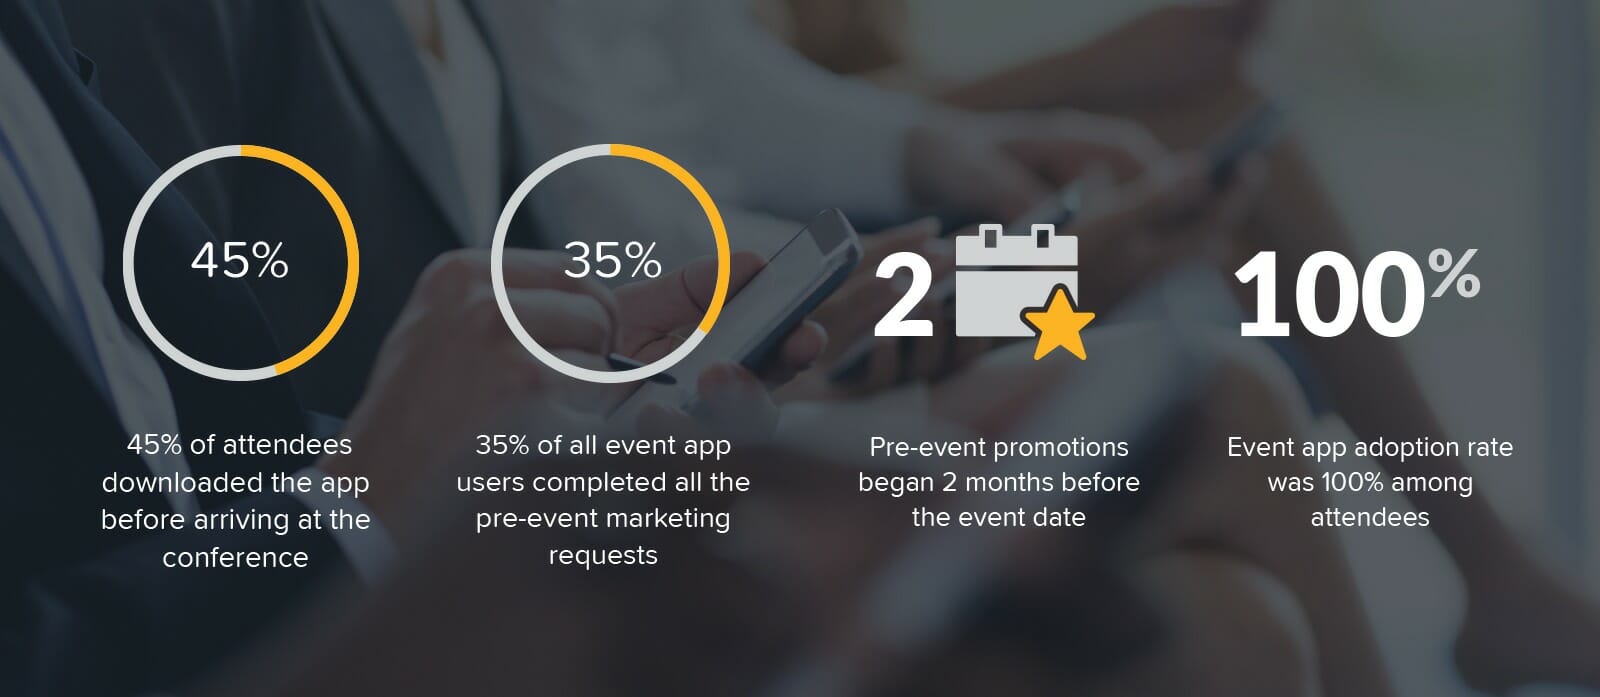 4 key results from RPM's event, including a 45% pre-event app download rate, 35% pre-event marketing request completion, 2 pre-event promotions and 100% app adoption 